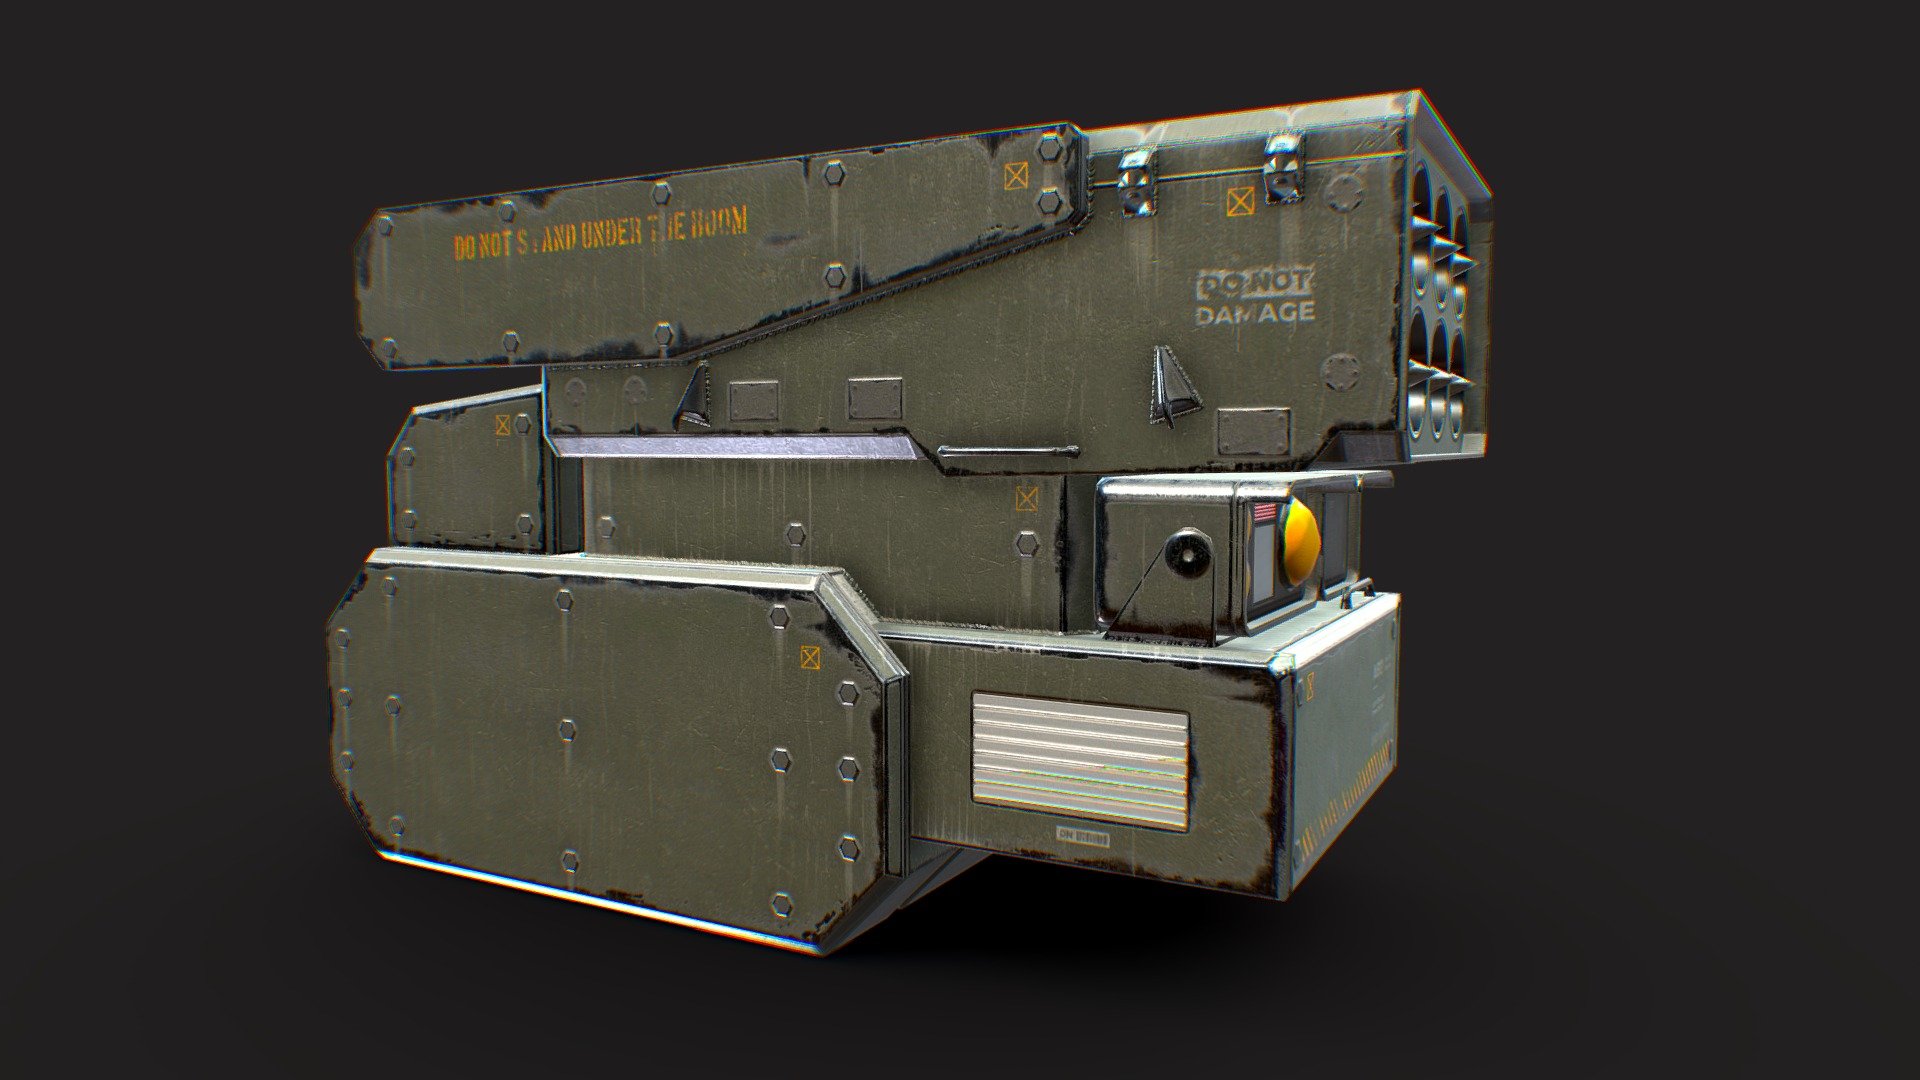 vehicles, sci-fi, rocket launcher:

DESCRIPTION: GAME READY MODEL!!! This model is provided as obj, fbx and SPP format.

SubstancePainter - file provided. (FULL SOURCE FILES) exported for any enjine!

Blender file provided with shaders and light set-up for PBR

Unity unitypackage Asset Package Provided!

Unreal UE4 Asset Package Provided!

.tbscene Asset Package Provided!

.mview and .glb Asset Package Provided!

Different versions of 3ds max scenes are provided.

SubstancePainter - file provided.

Marmoset Toolbag - file proviede (.tbscene scene)

Provides full textures for the Jet. Textures in the resolution of 4096x4096. Enjoy using! :) - Gun 4 (Rocket) rocket launcher - Buy Royalty Free 3D model by sergey.koznov 3d model